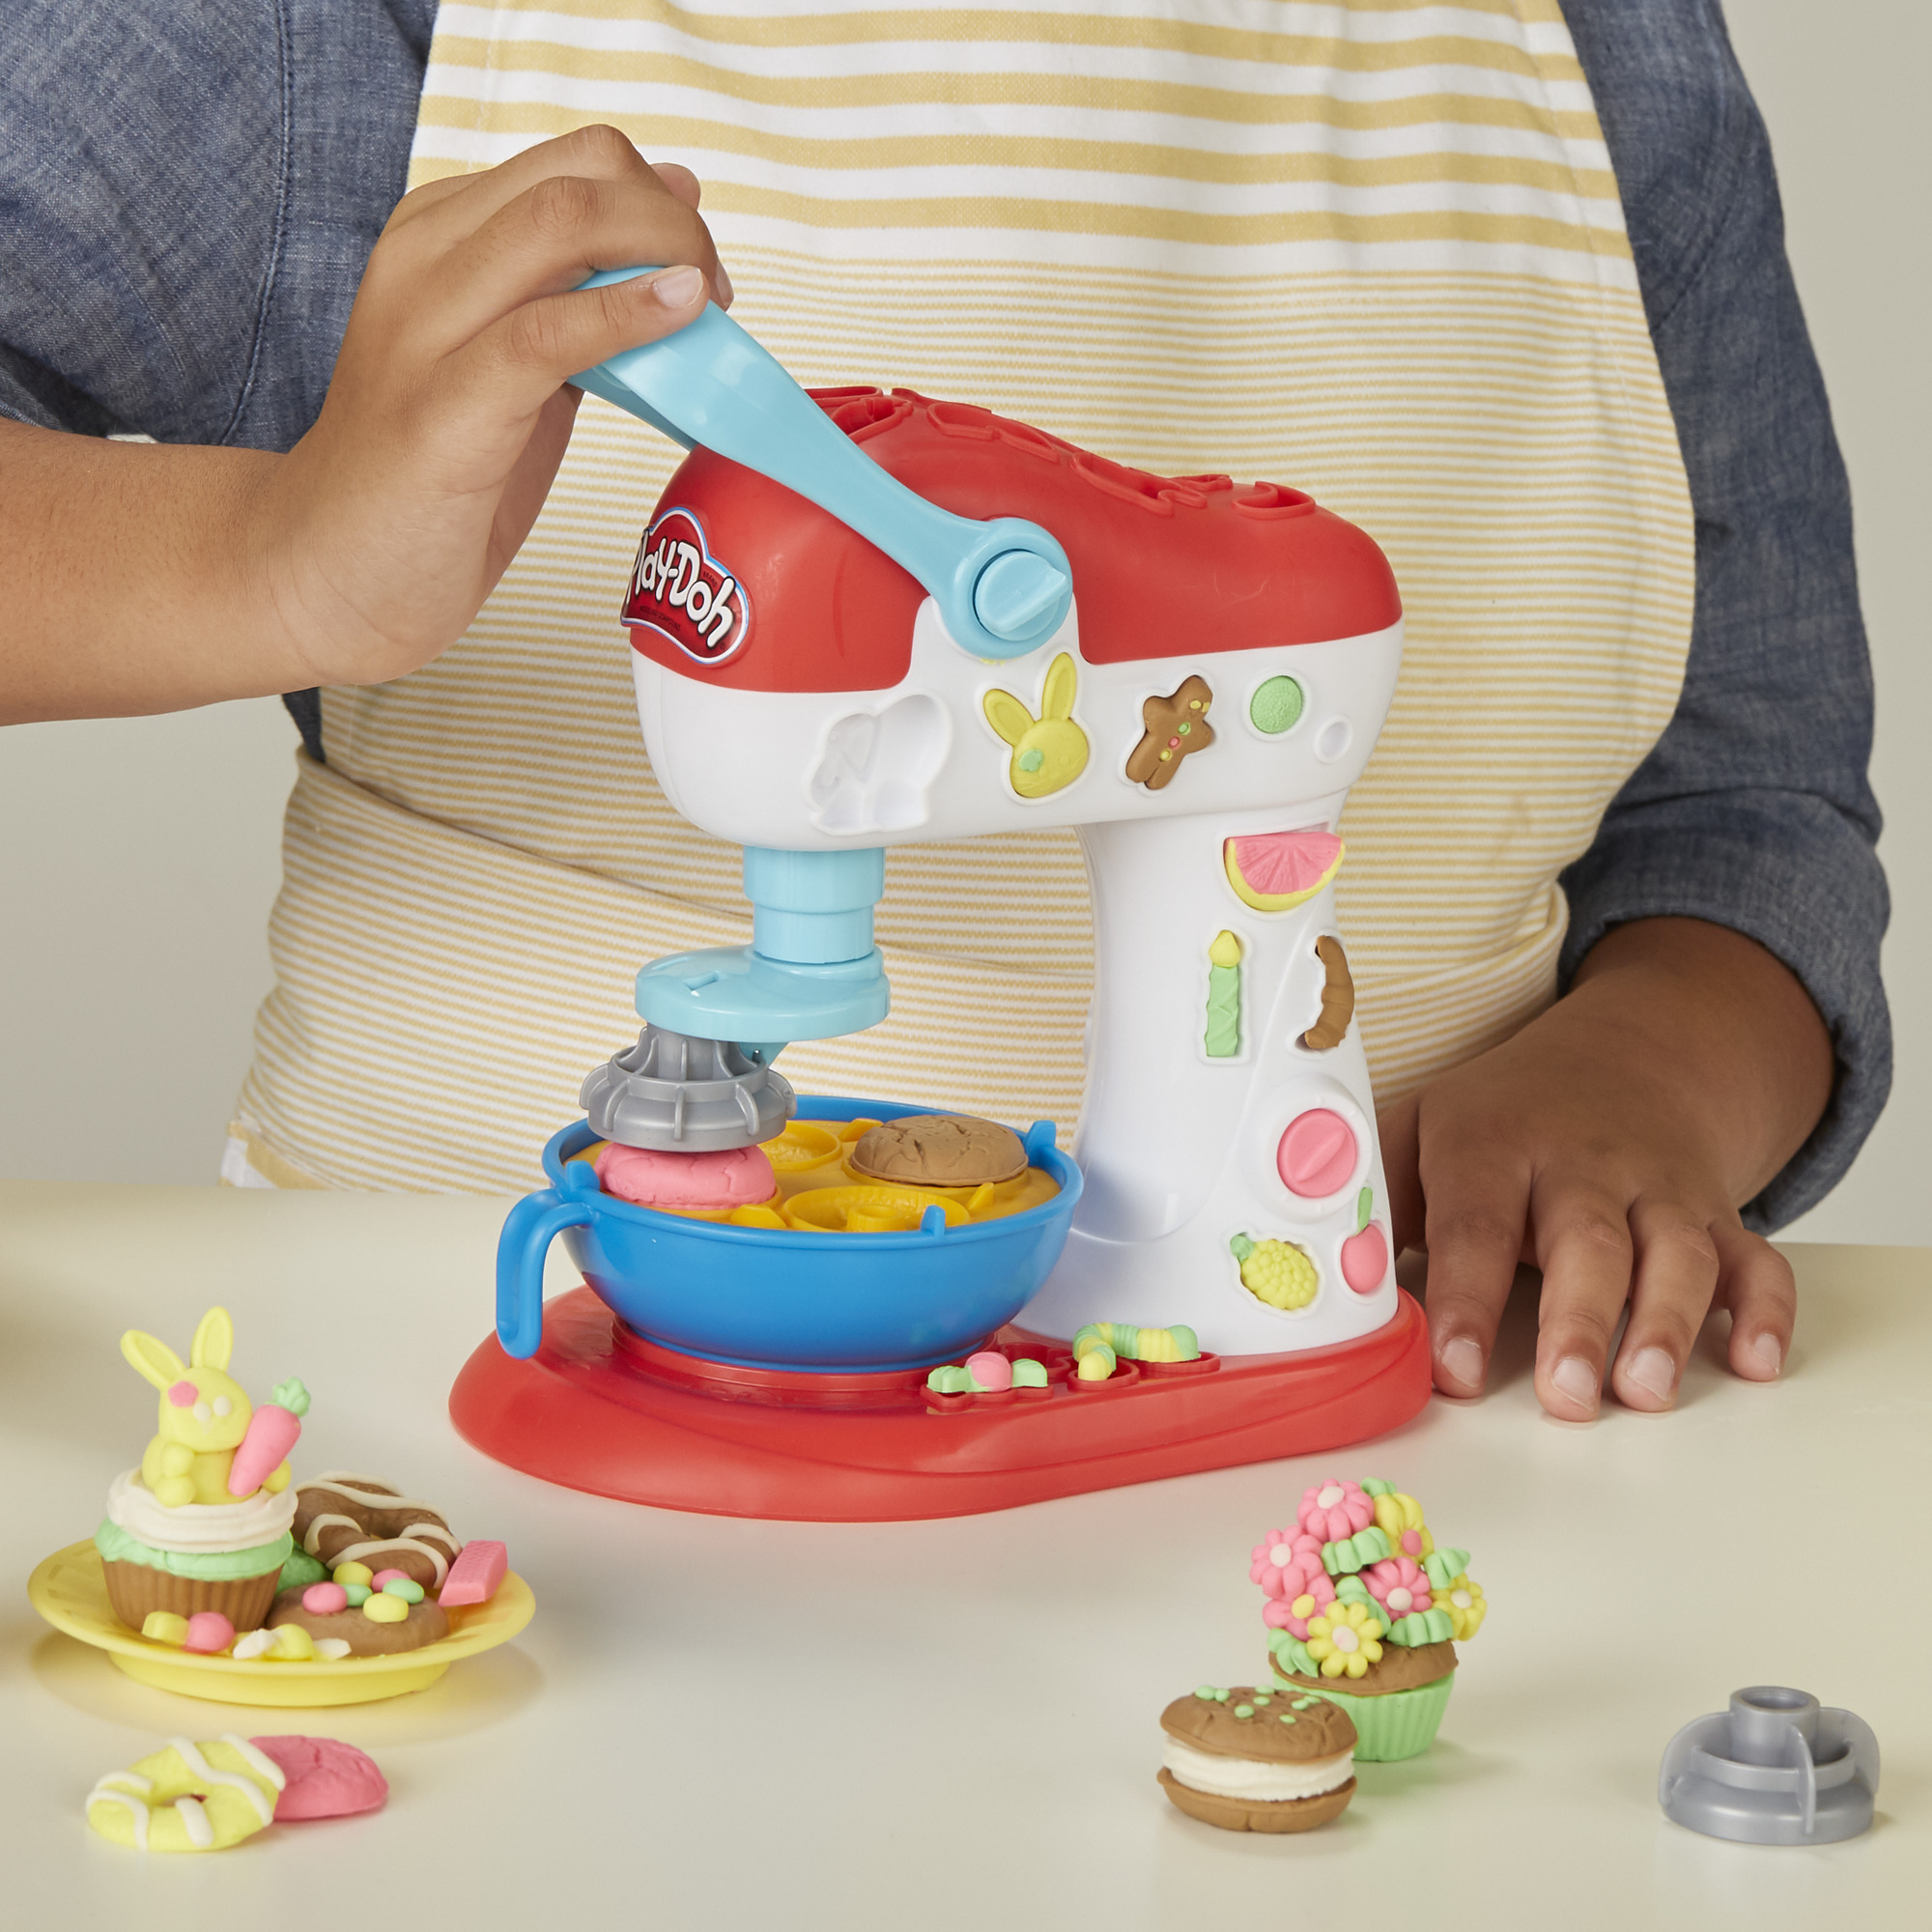 Play-Doh Kitchen Creations Spinning Treats Mixer Food Set with 5 Cans - image 5 of 16